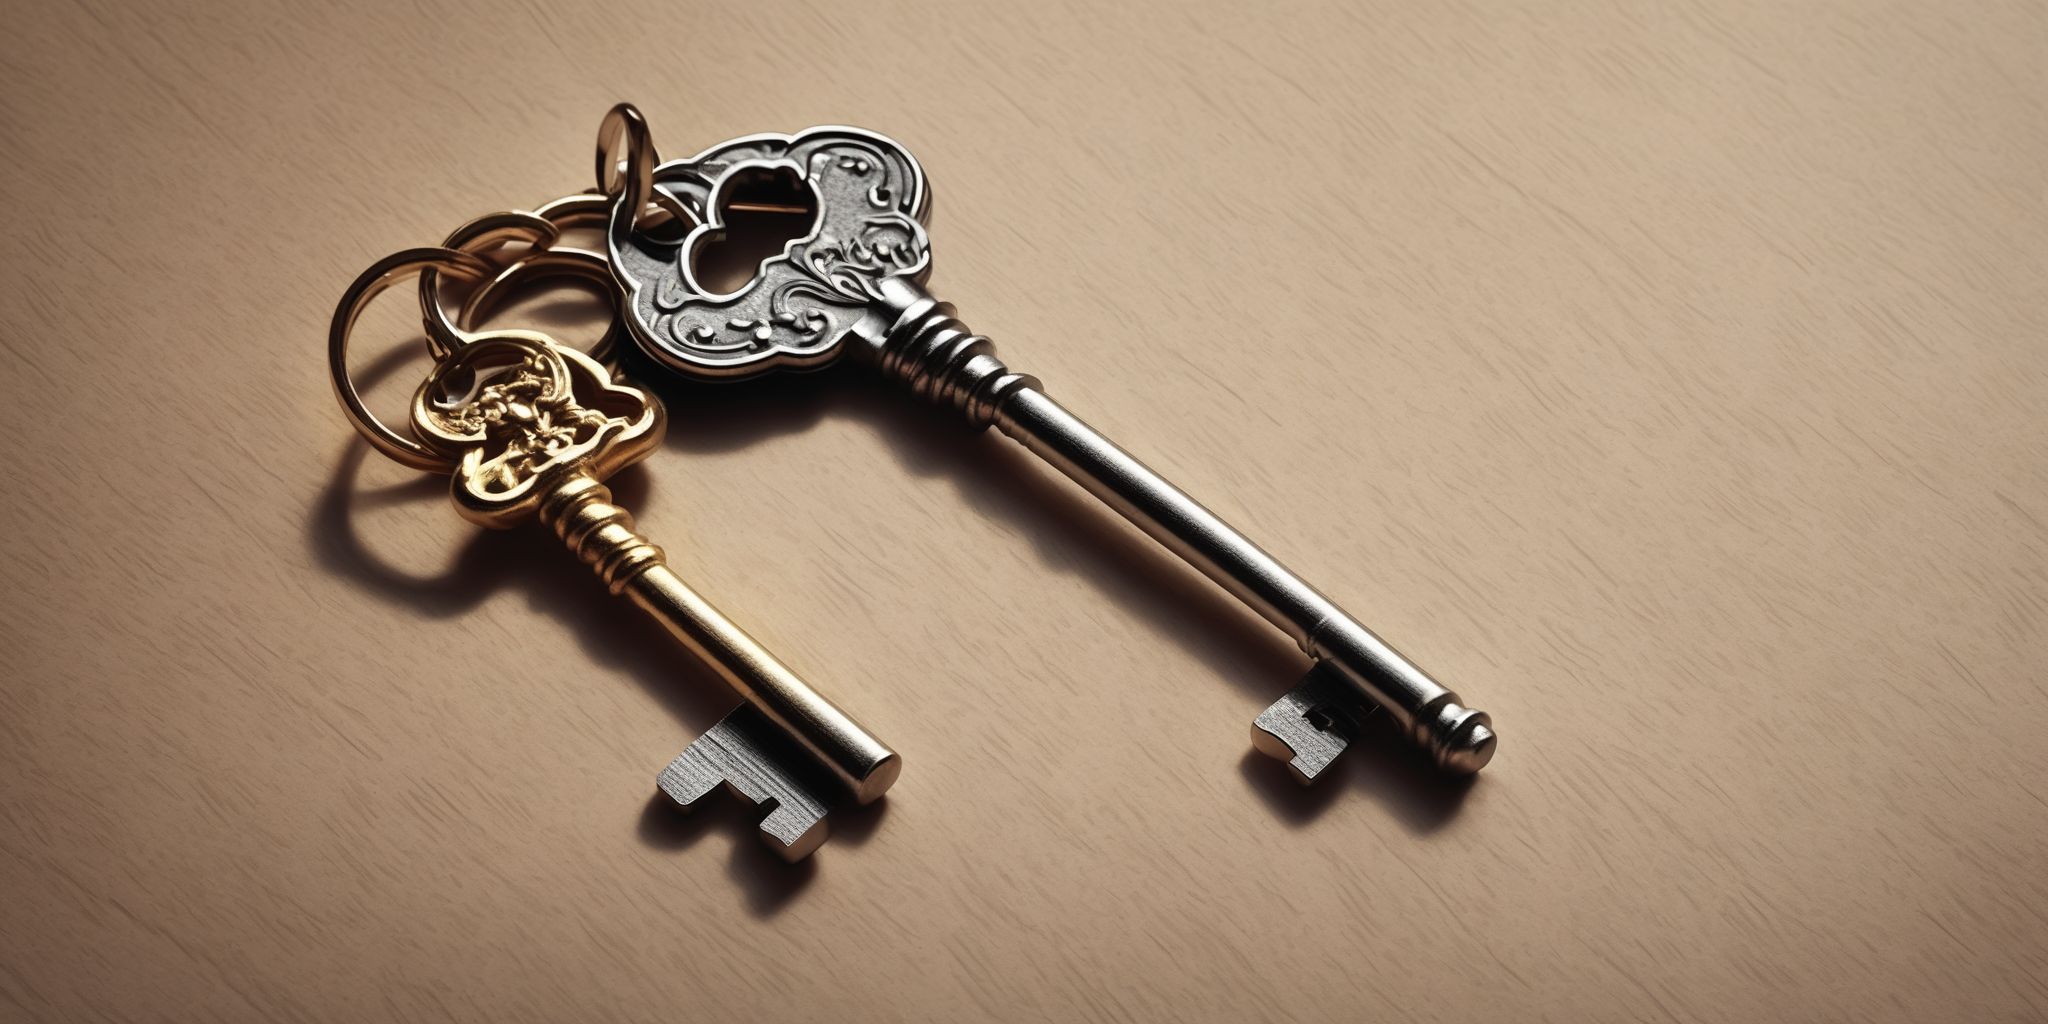 Key  in realistic, photographic style